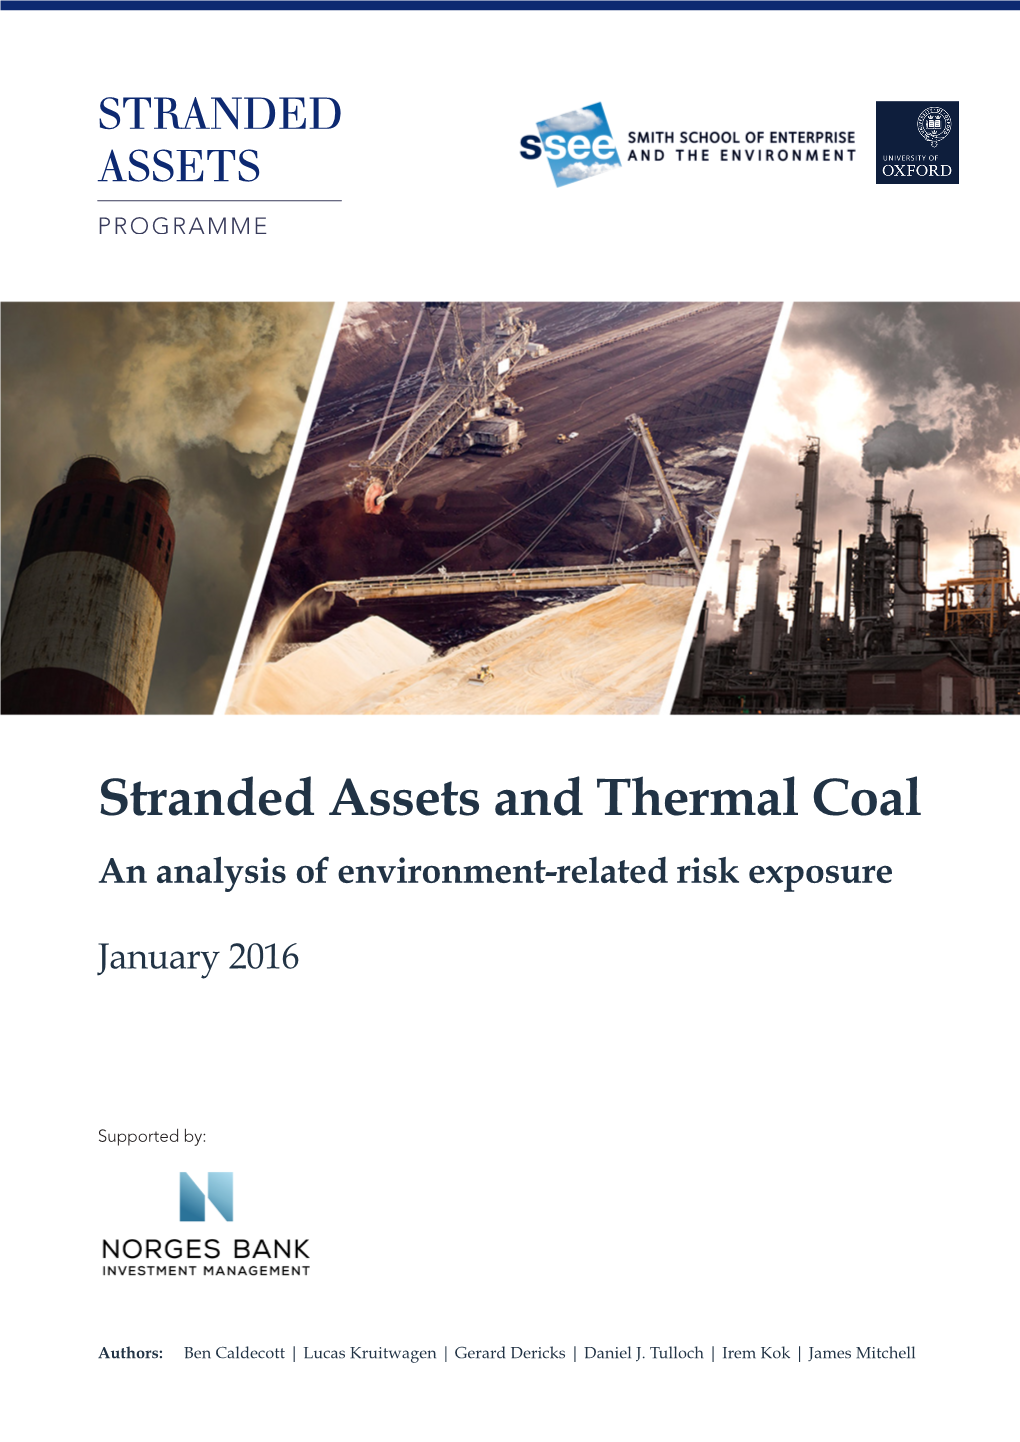 Stranded Assets and Thermal Coal an Analysis of Environment-Related Risk Exposure